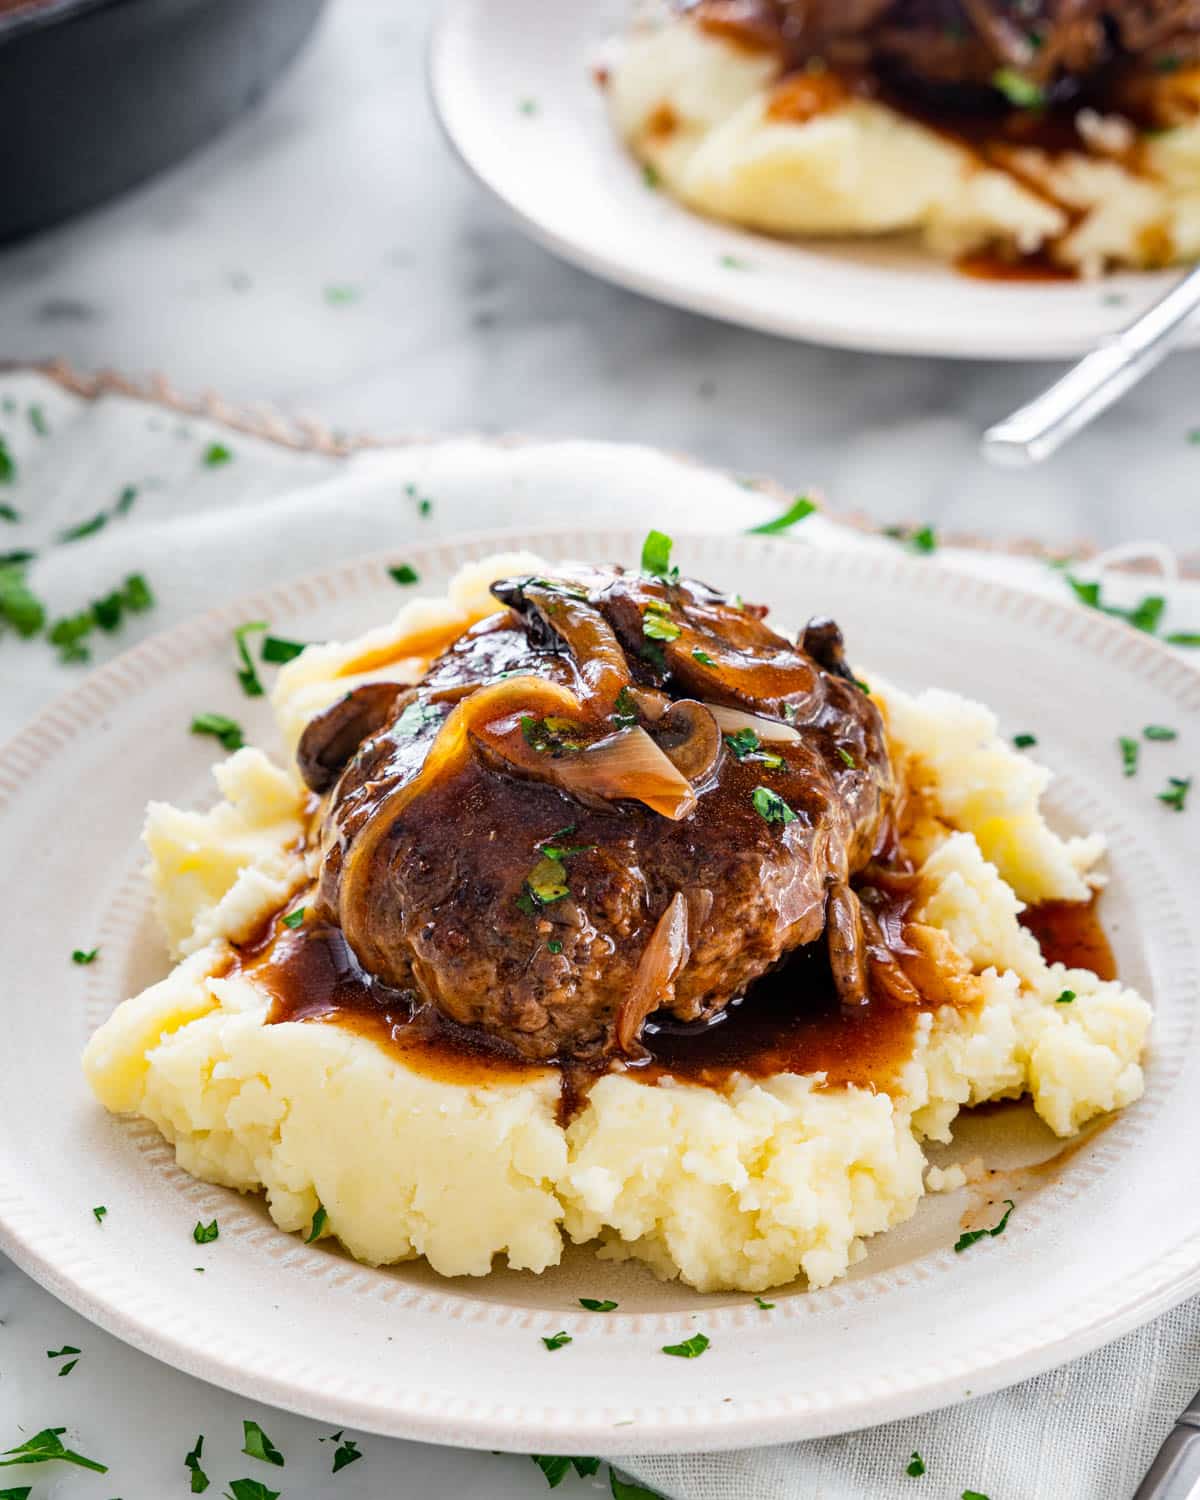 a salisbury steak with mushroom gravy over a bed of mashed potatoes on a white plate